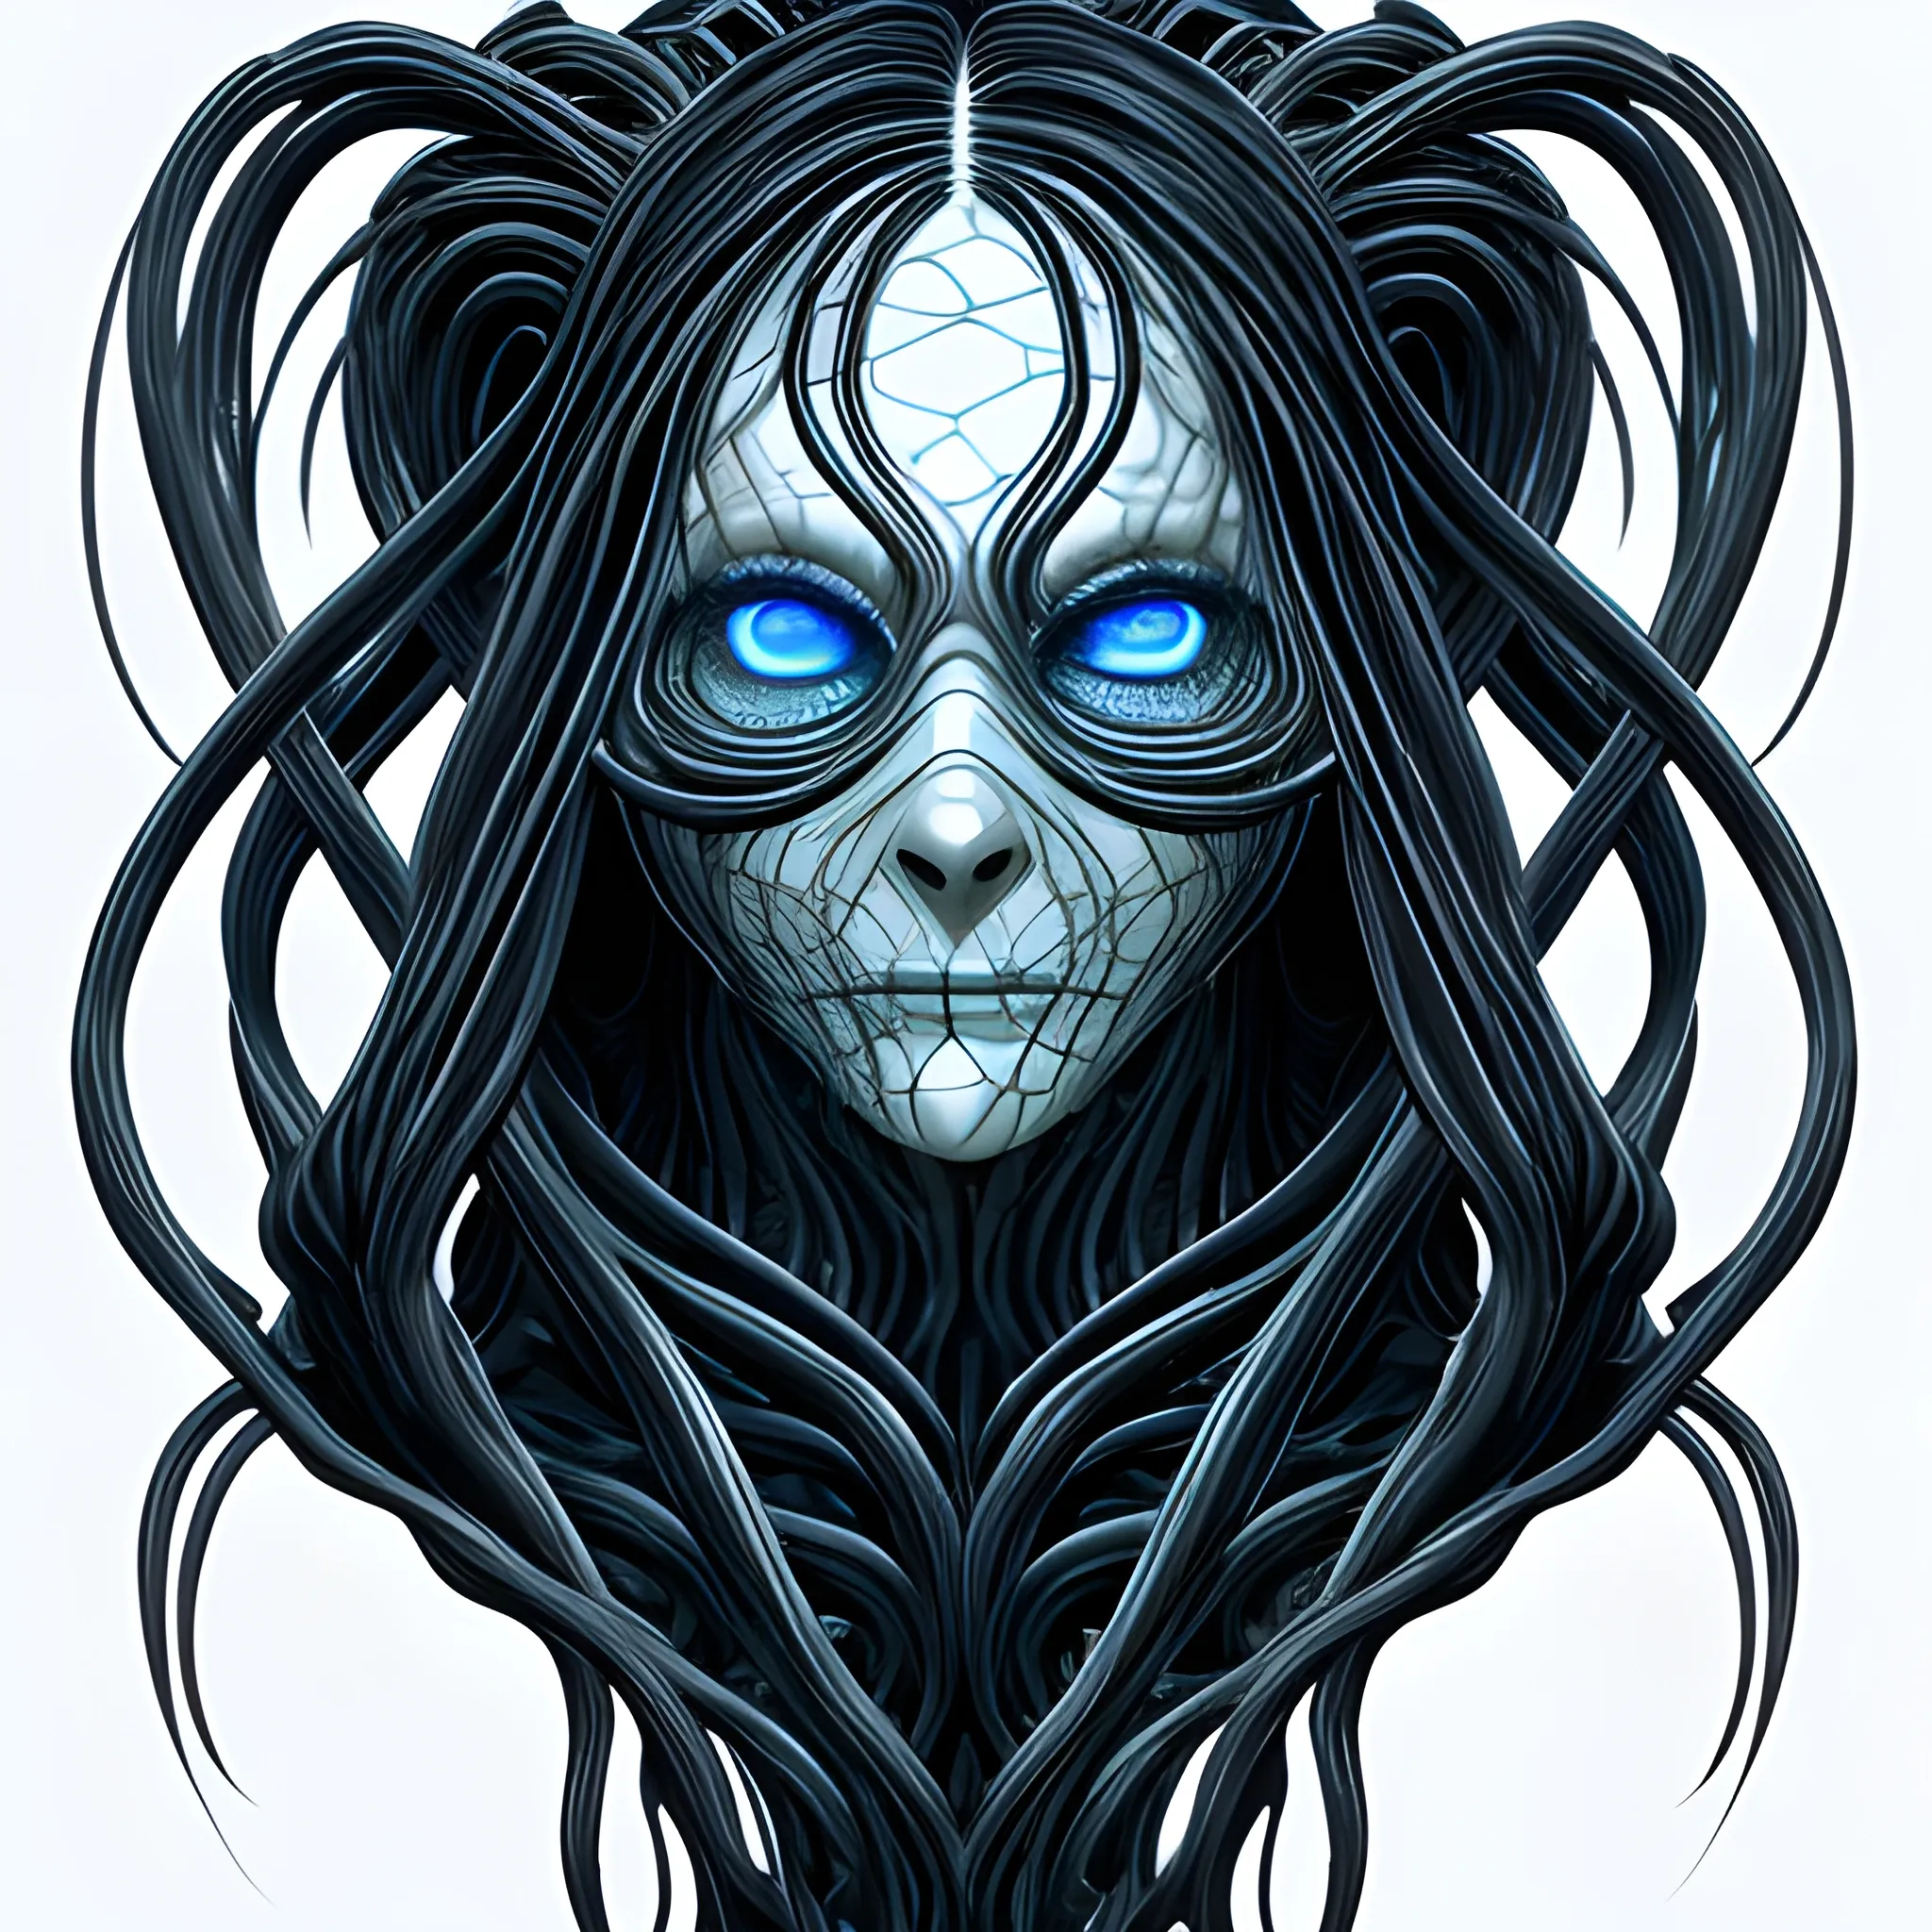 Wireframe, a pale, tentacled face rising from the inky black depths, with flowing ebony hair and eyes the crystalline blue of the Aegean Sea, its beautiful yet cruel features twisted with divine rage, in the style of H.R. Giger